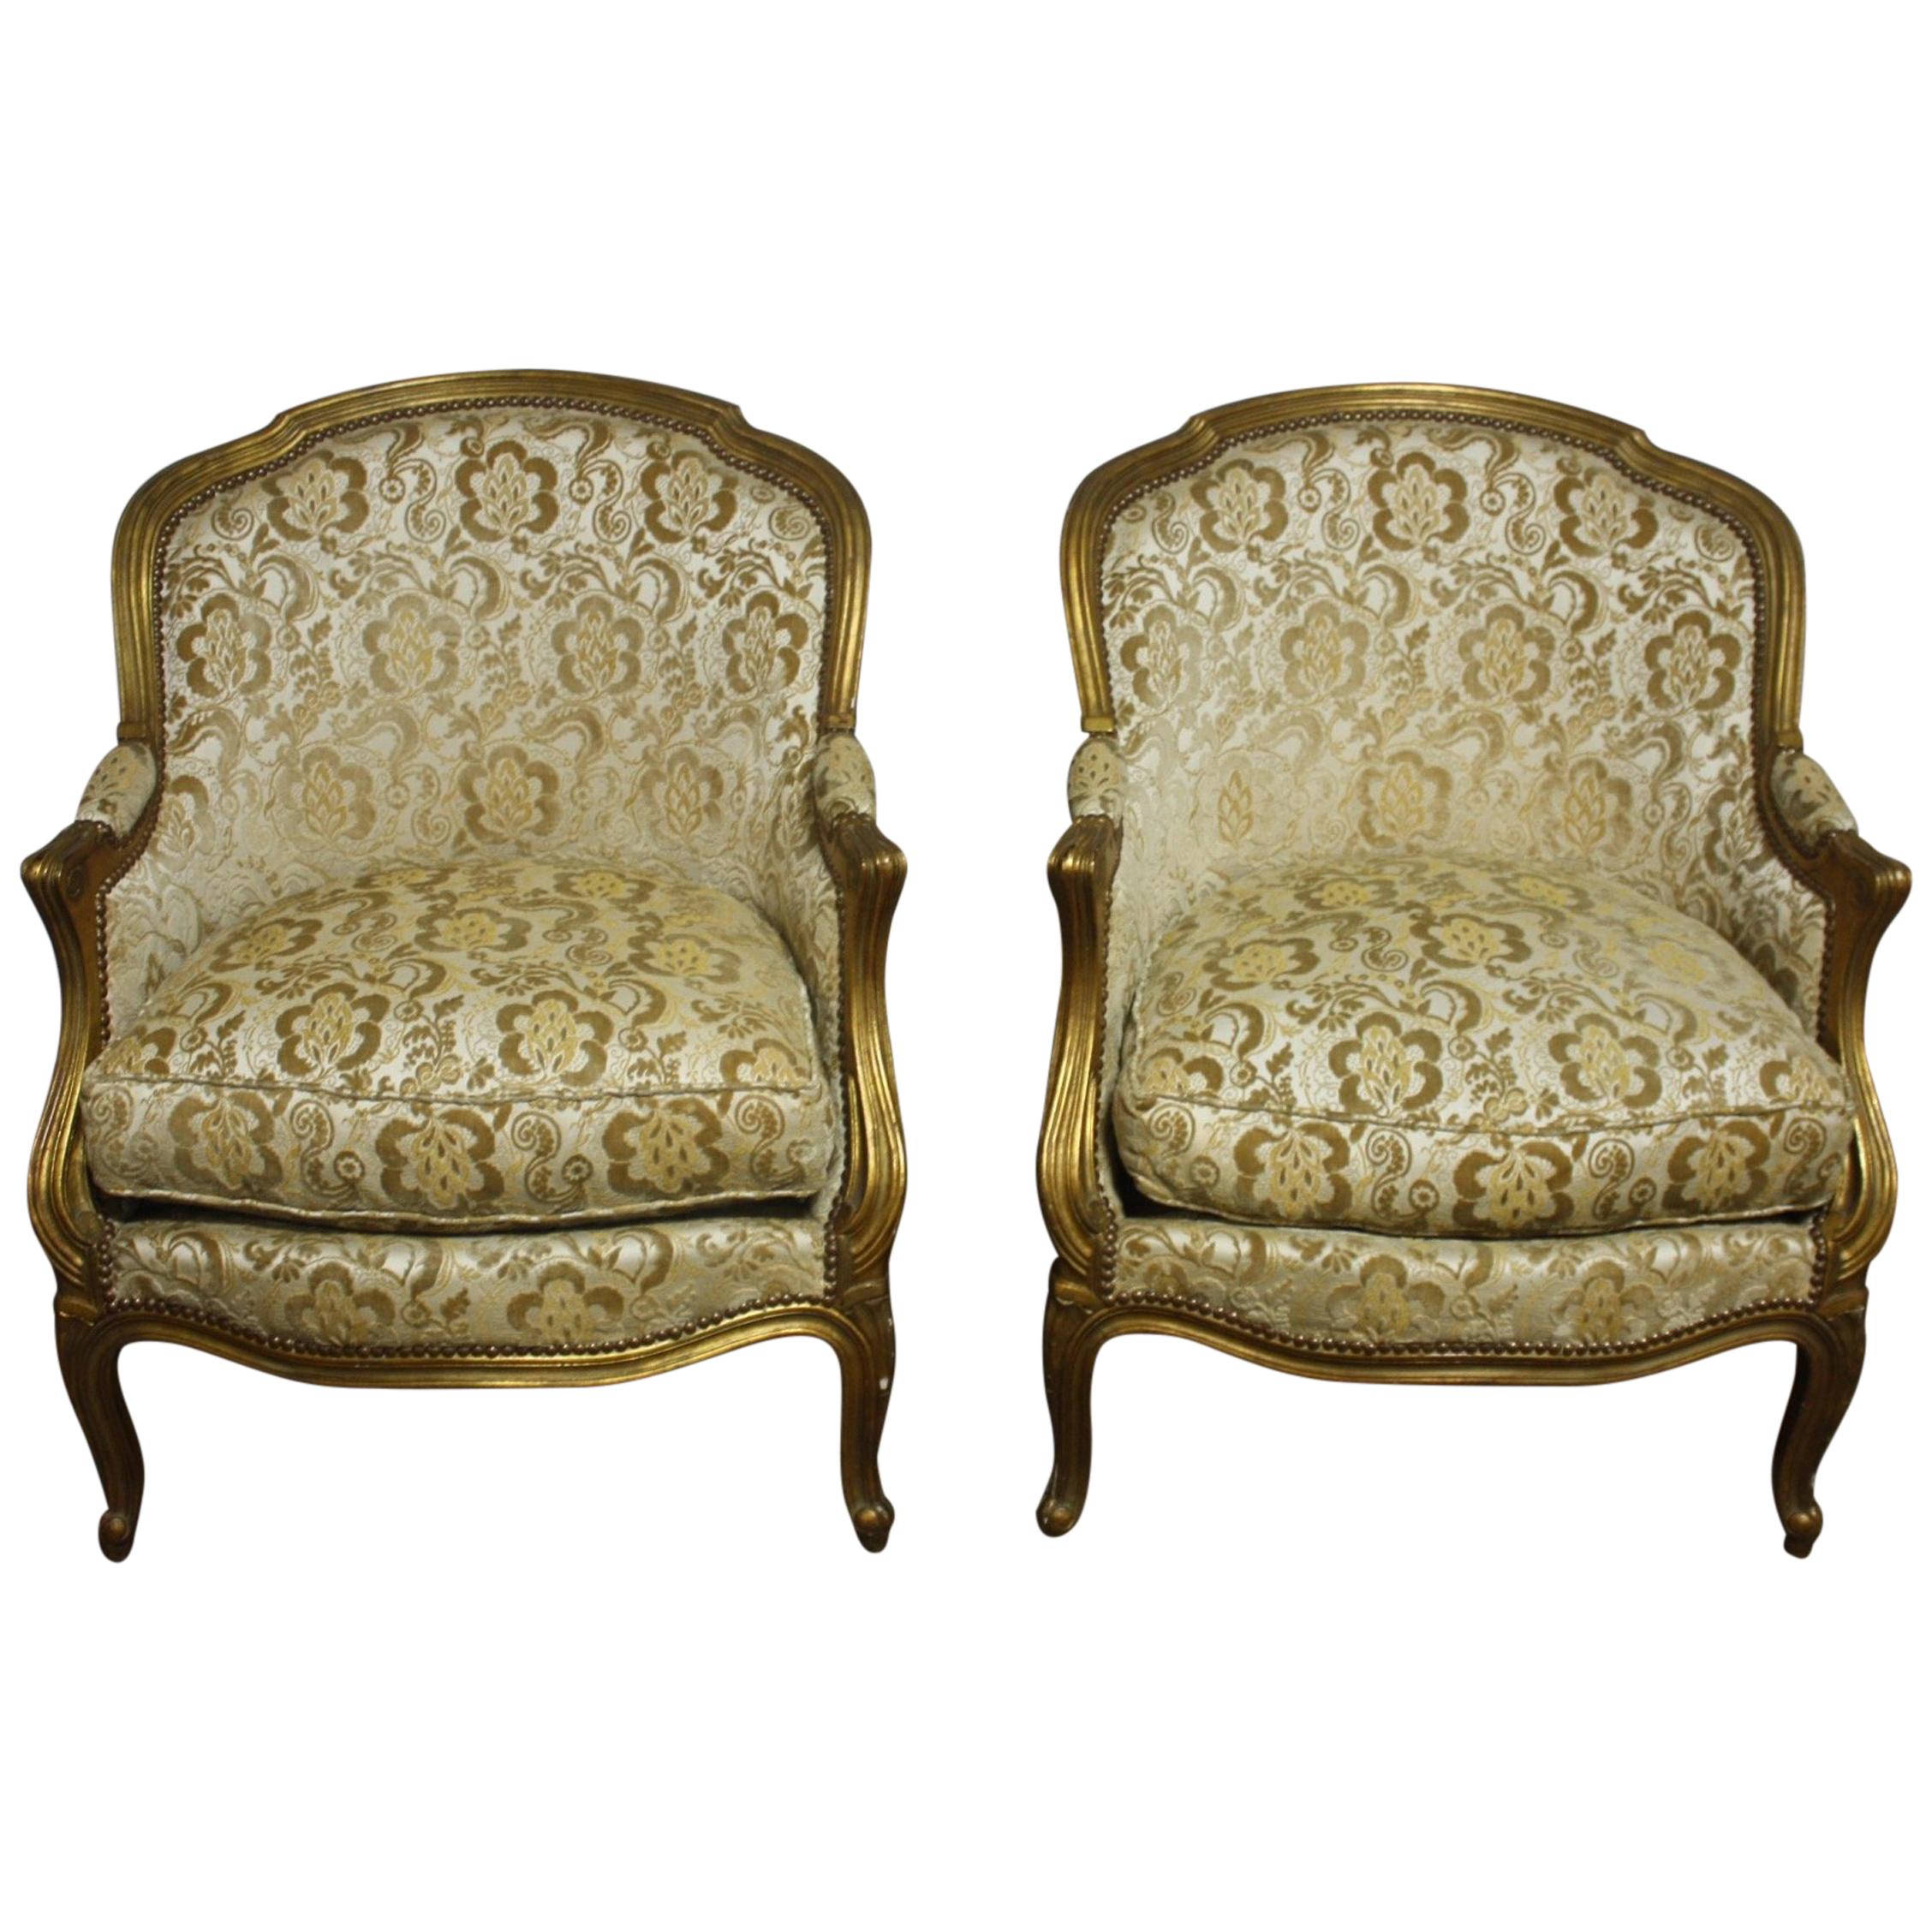 Late 19th Century Pair of French Bergere Chairs